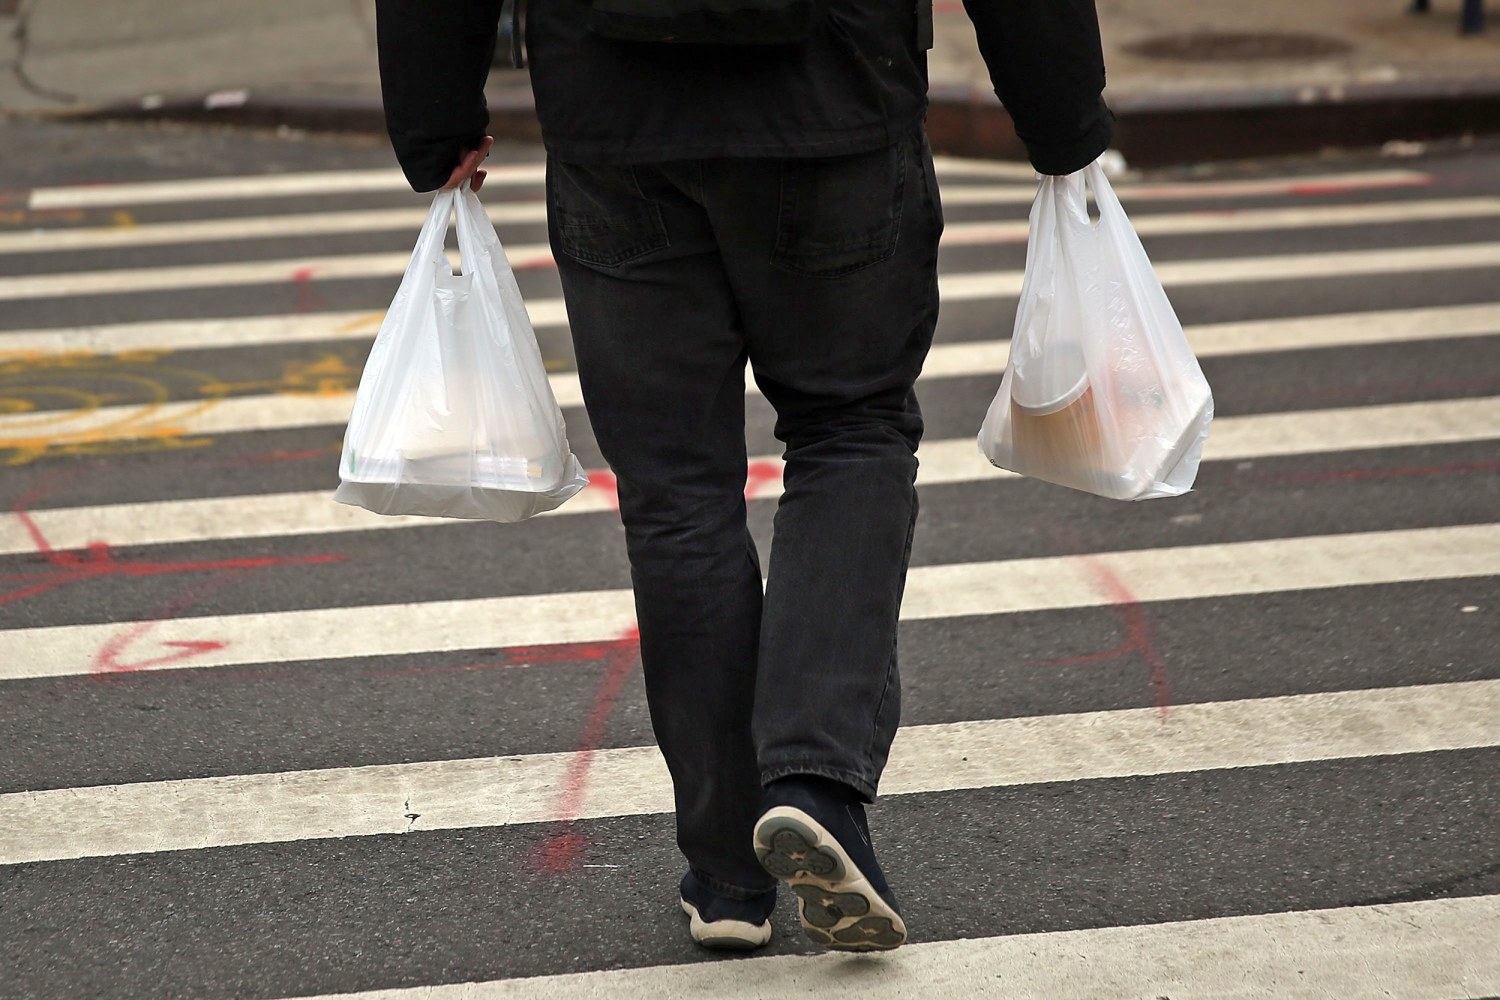 N.Y. Today: Single-Use Plastic Bags May Soon Be Banned - The New